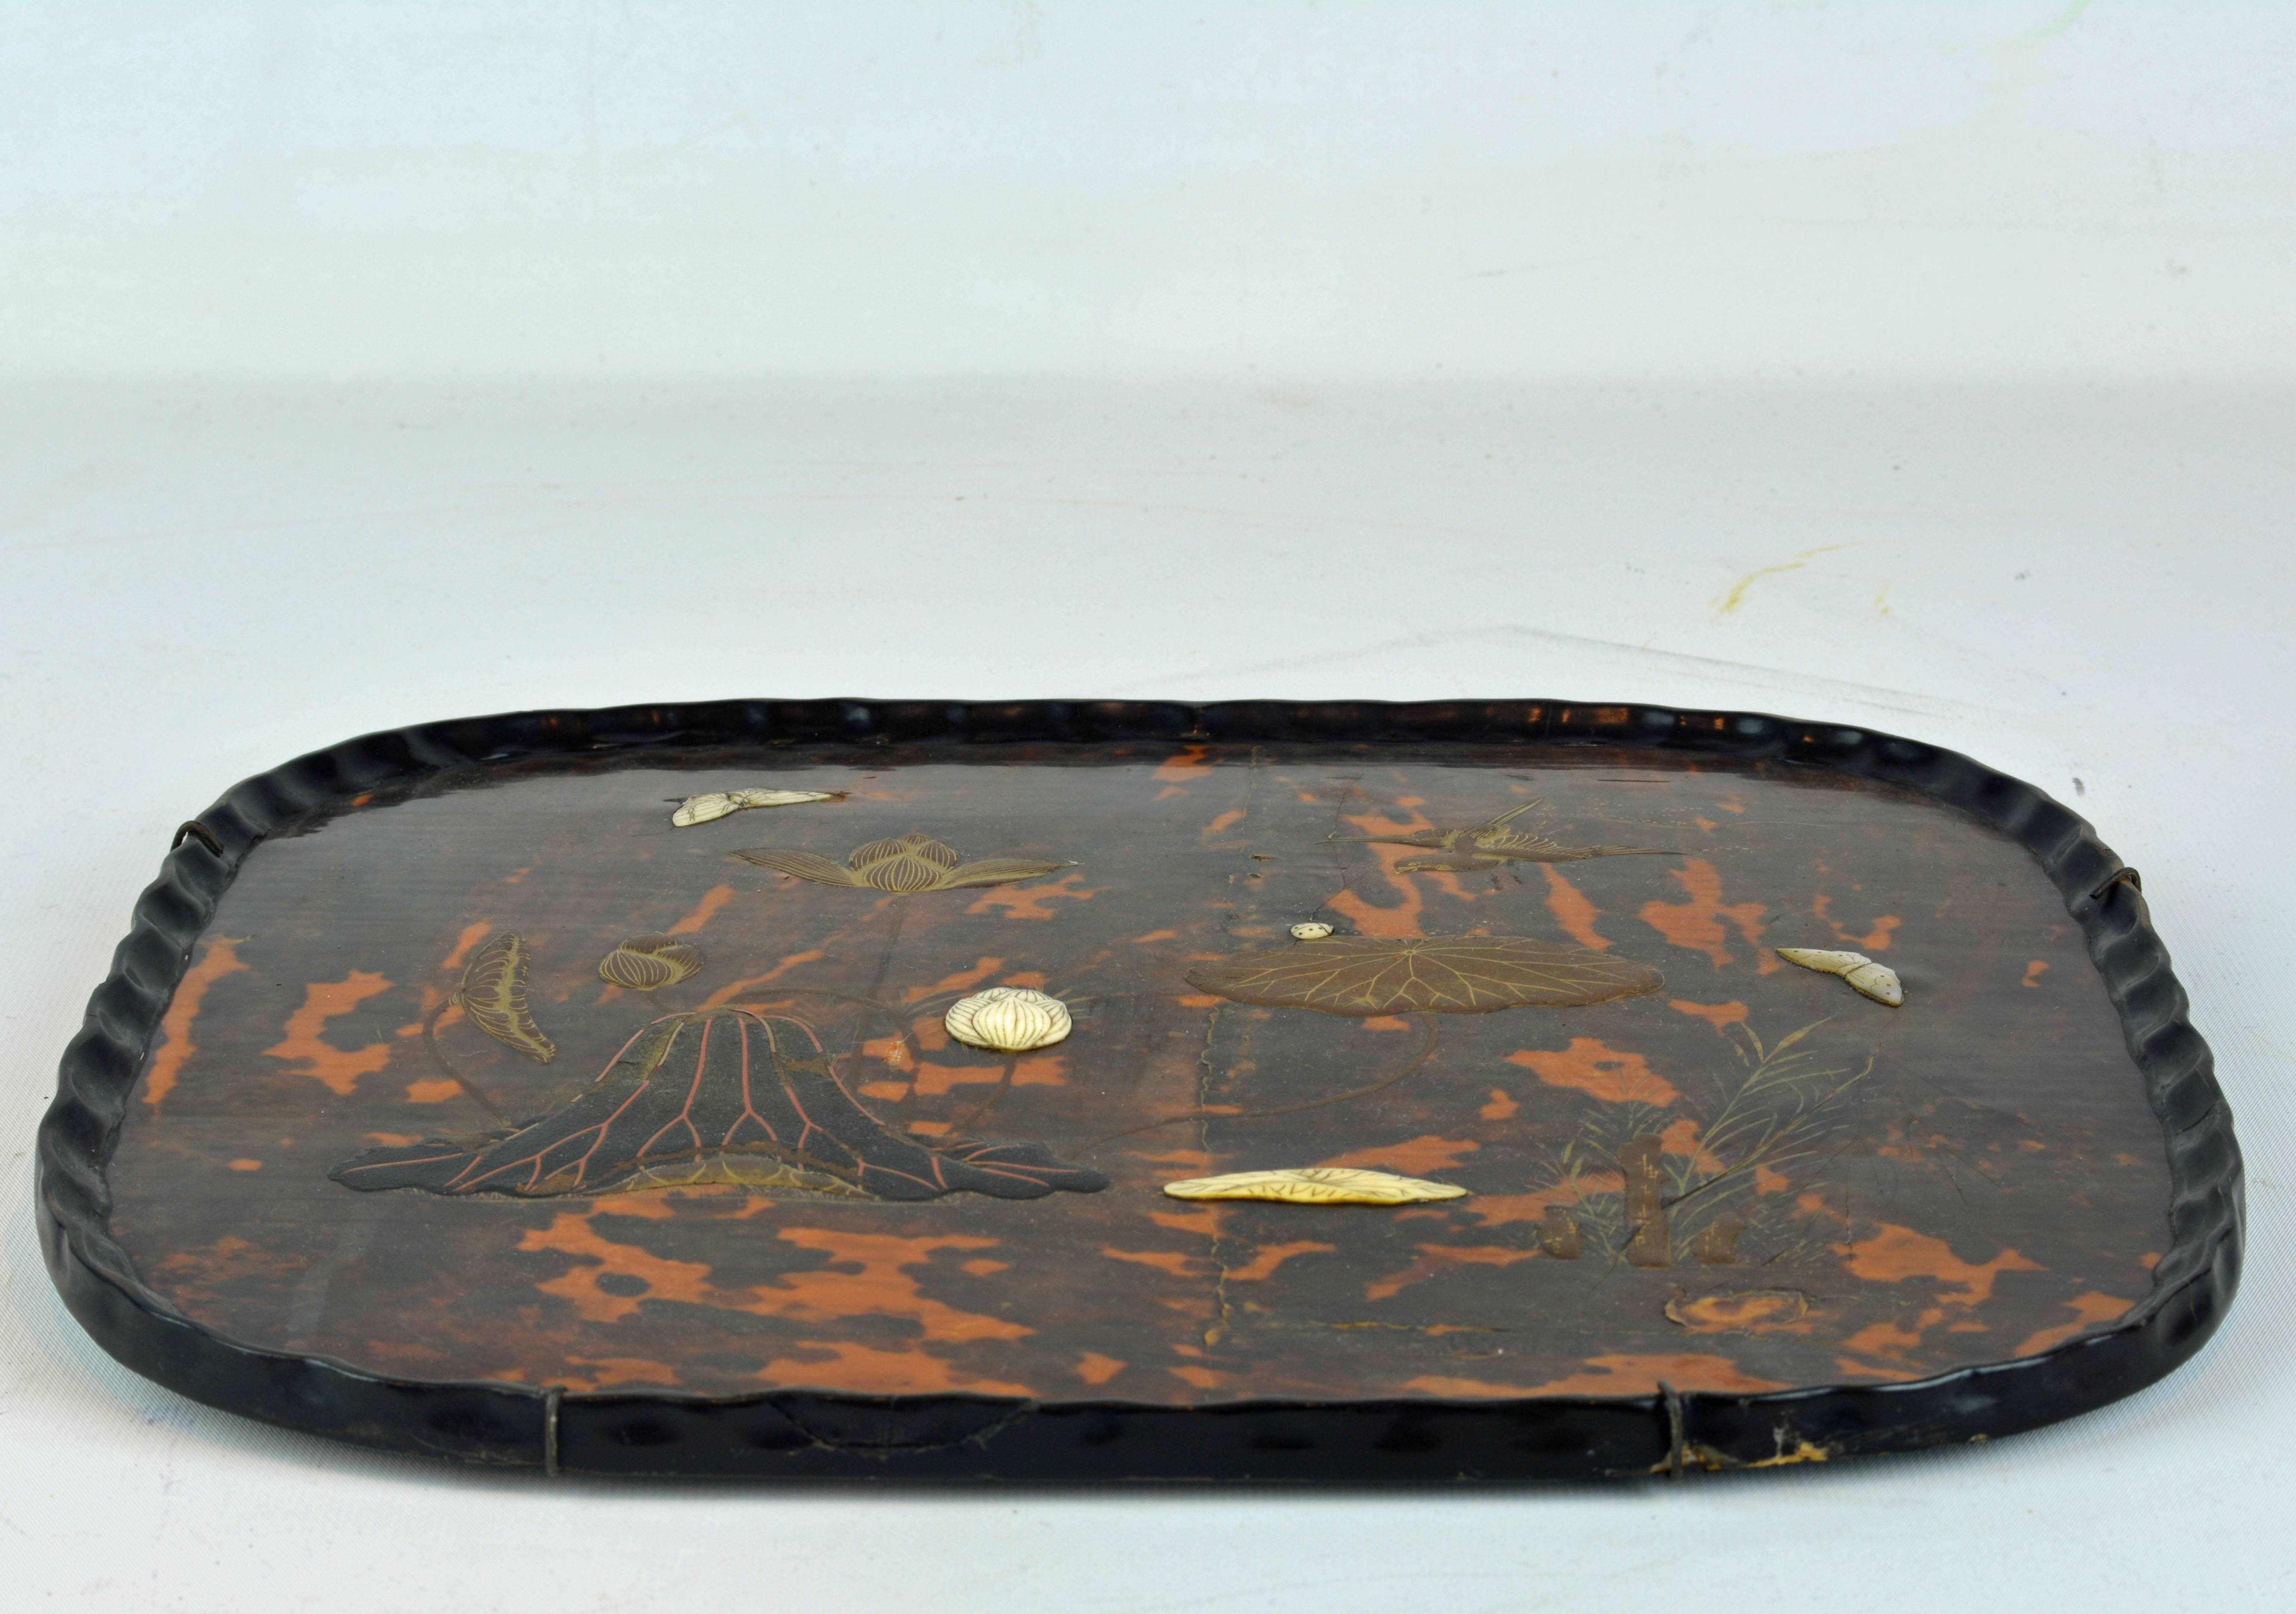 Japonisme Rare 19th Century Japanese Inlaid Lacquer and Tortoise Shell Tea Tray